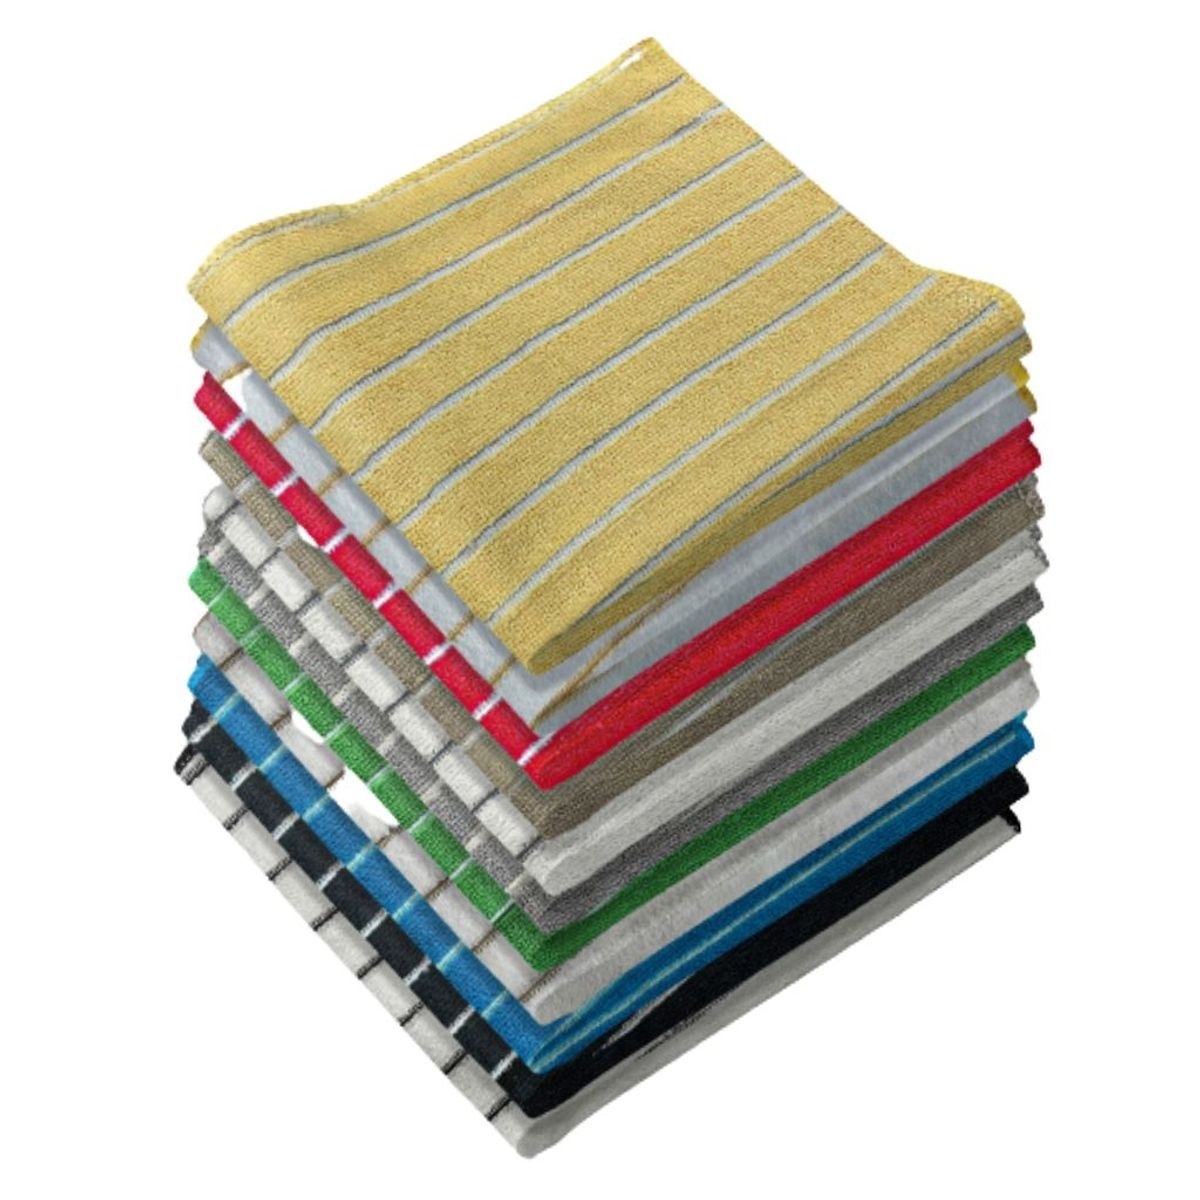 12/24-Pack: Ultra-Absorbent Multi Use Cleaning Super Soft Microfiber Dish Utility Rag Cloths - Striped, 24-pack